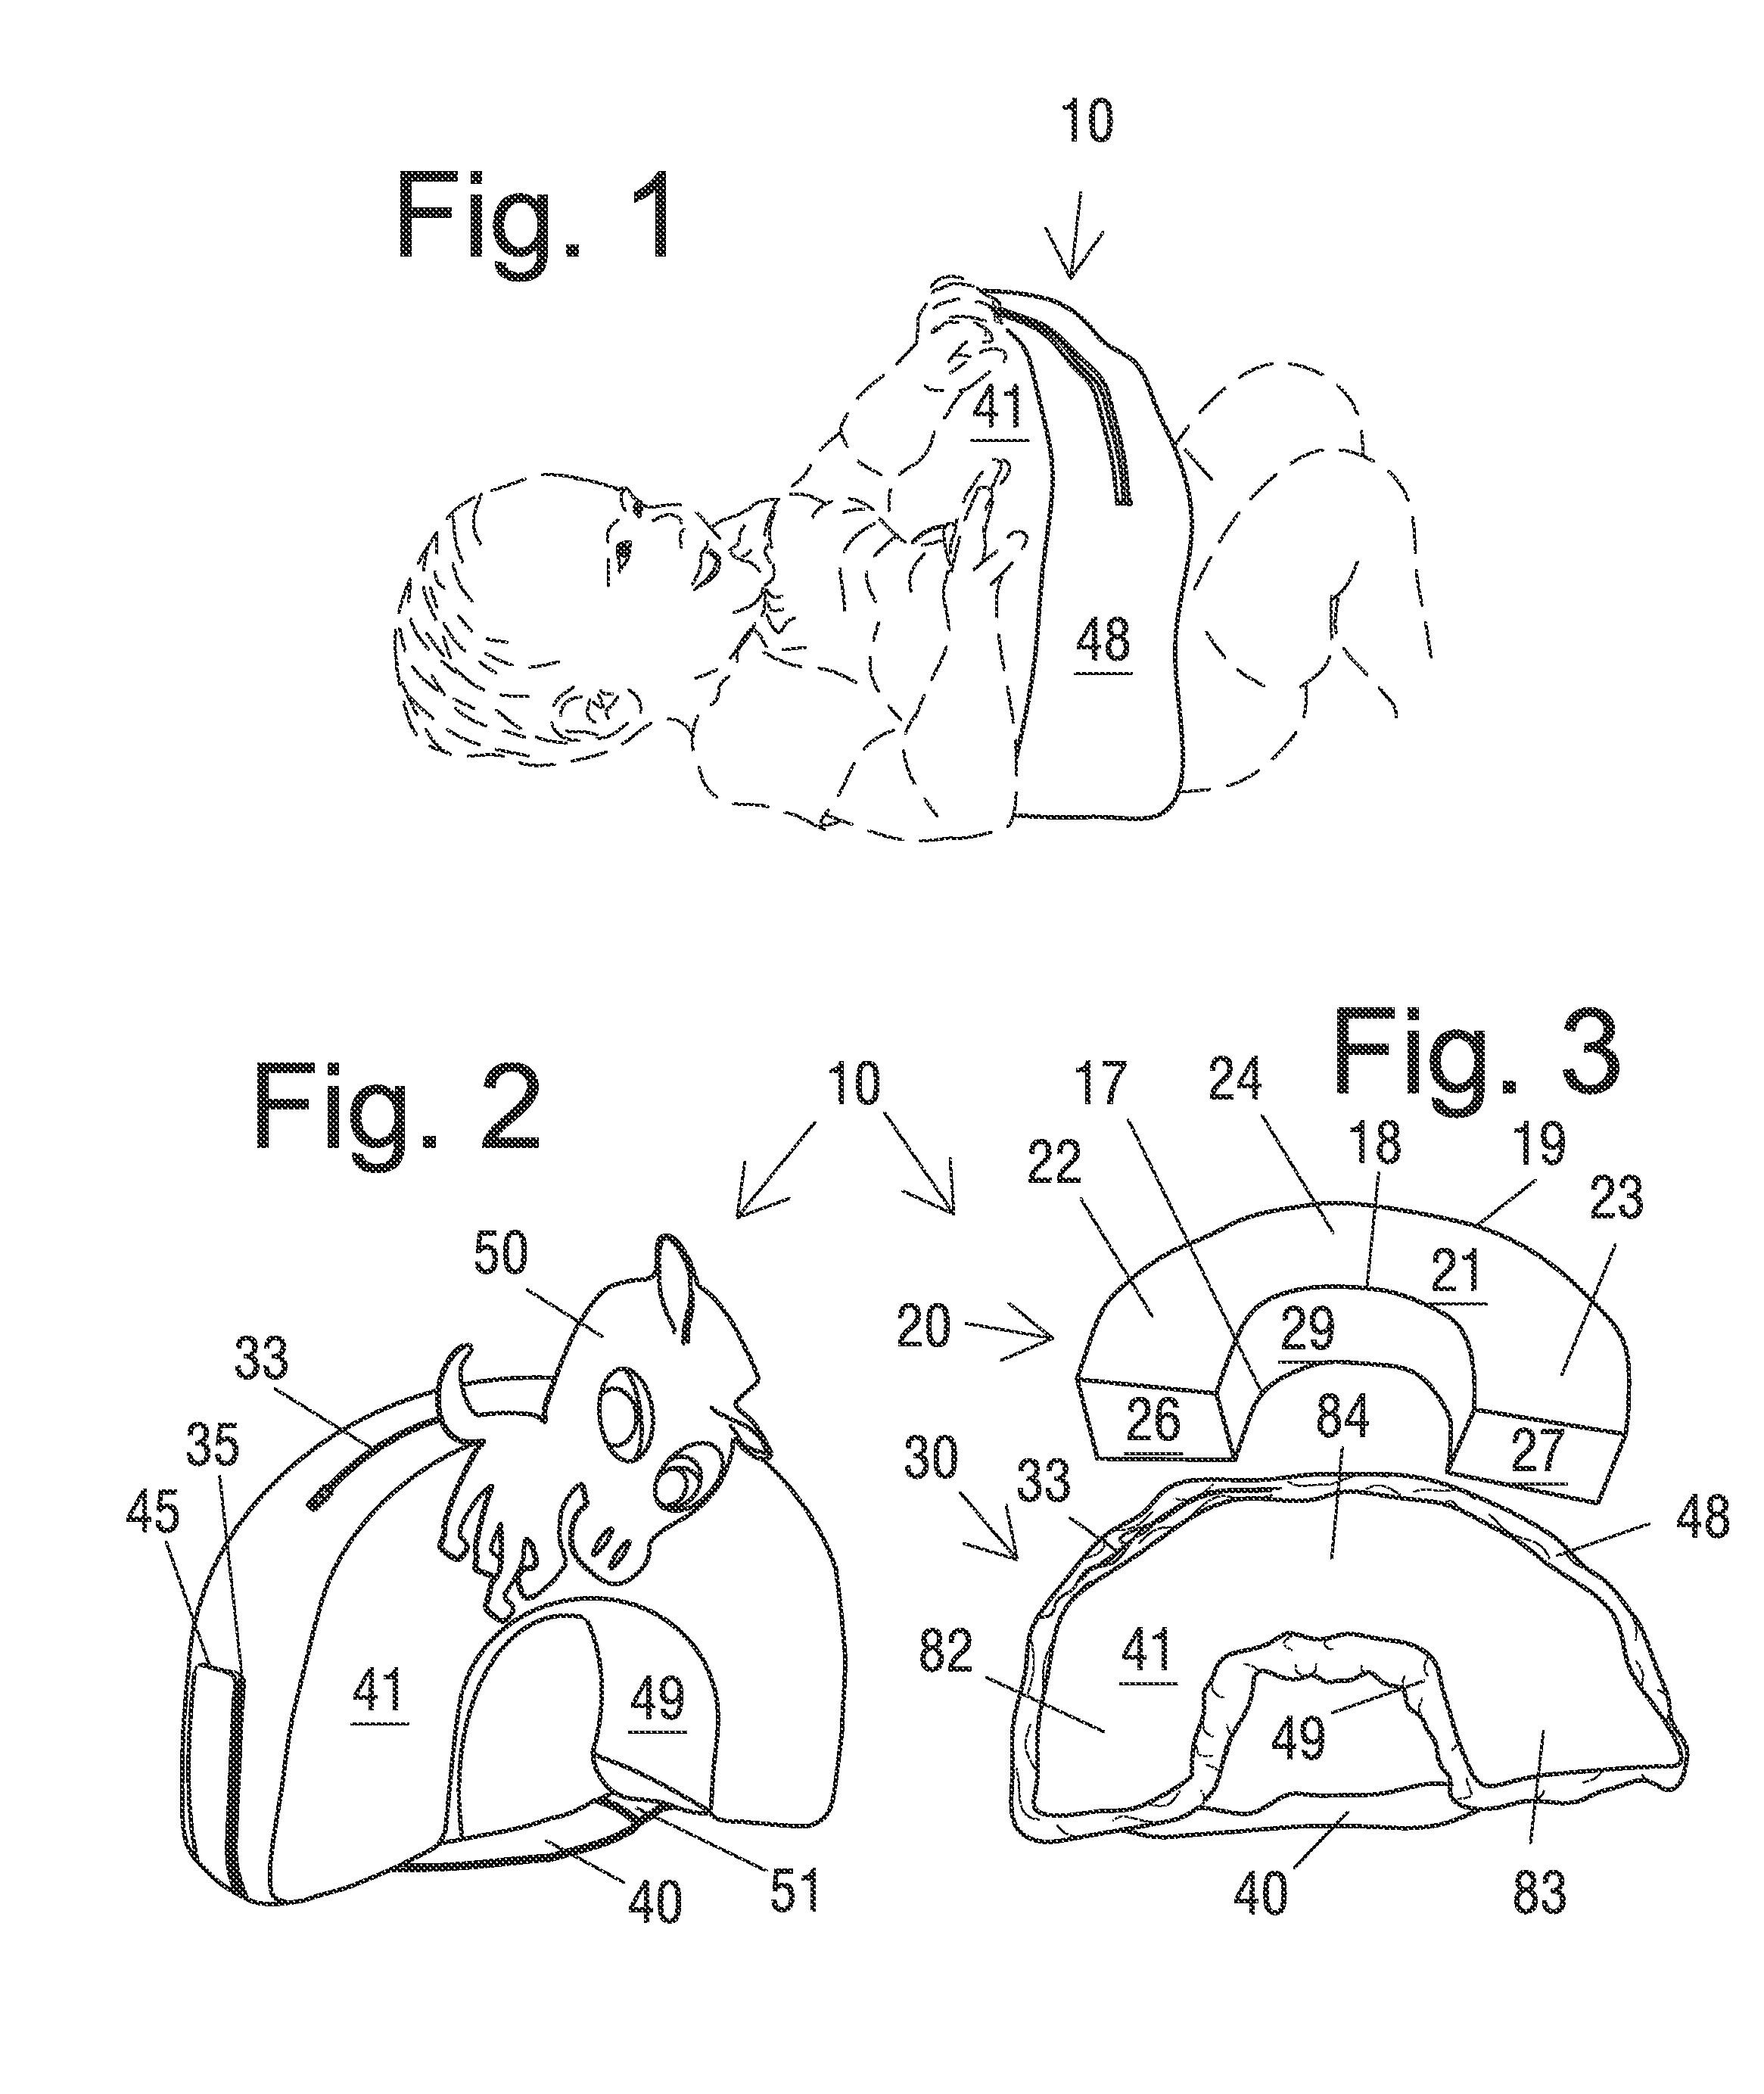 Portable diaper-changing restraint system